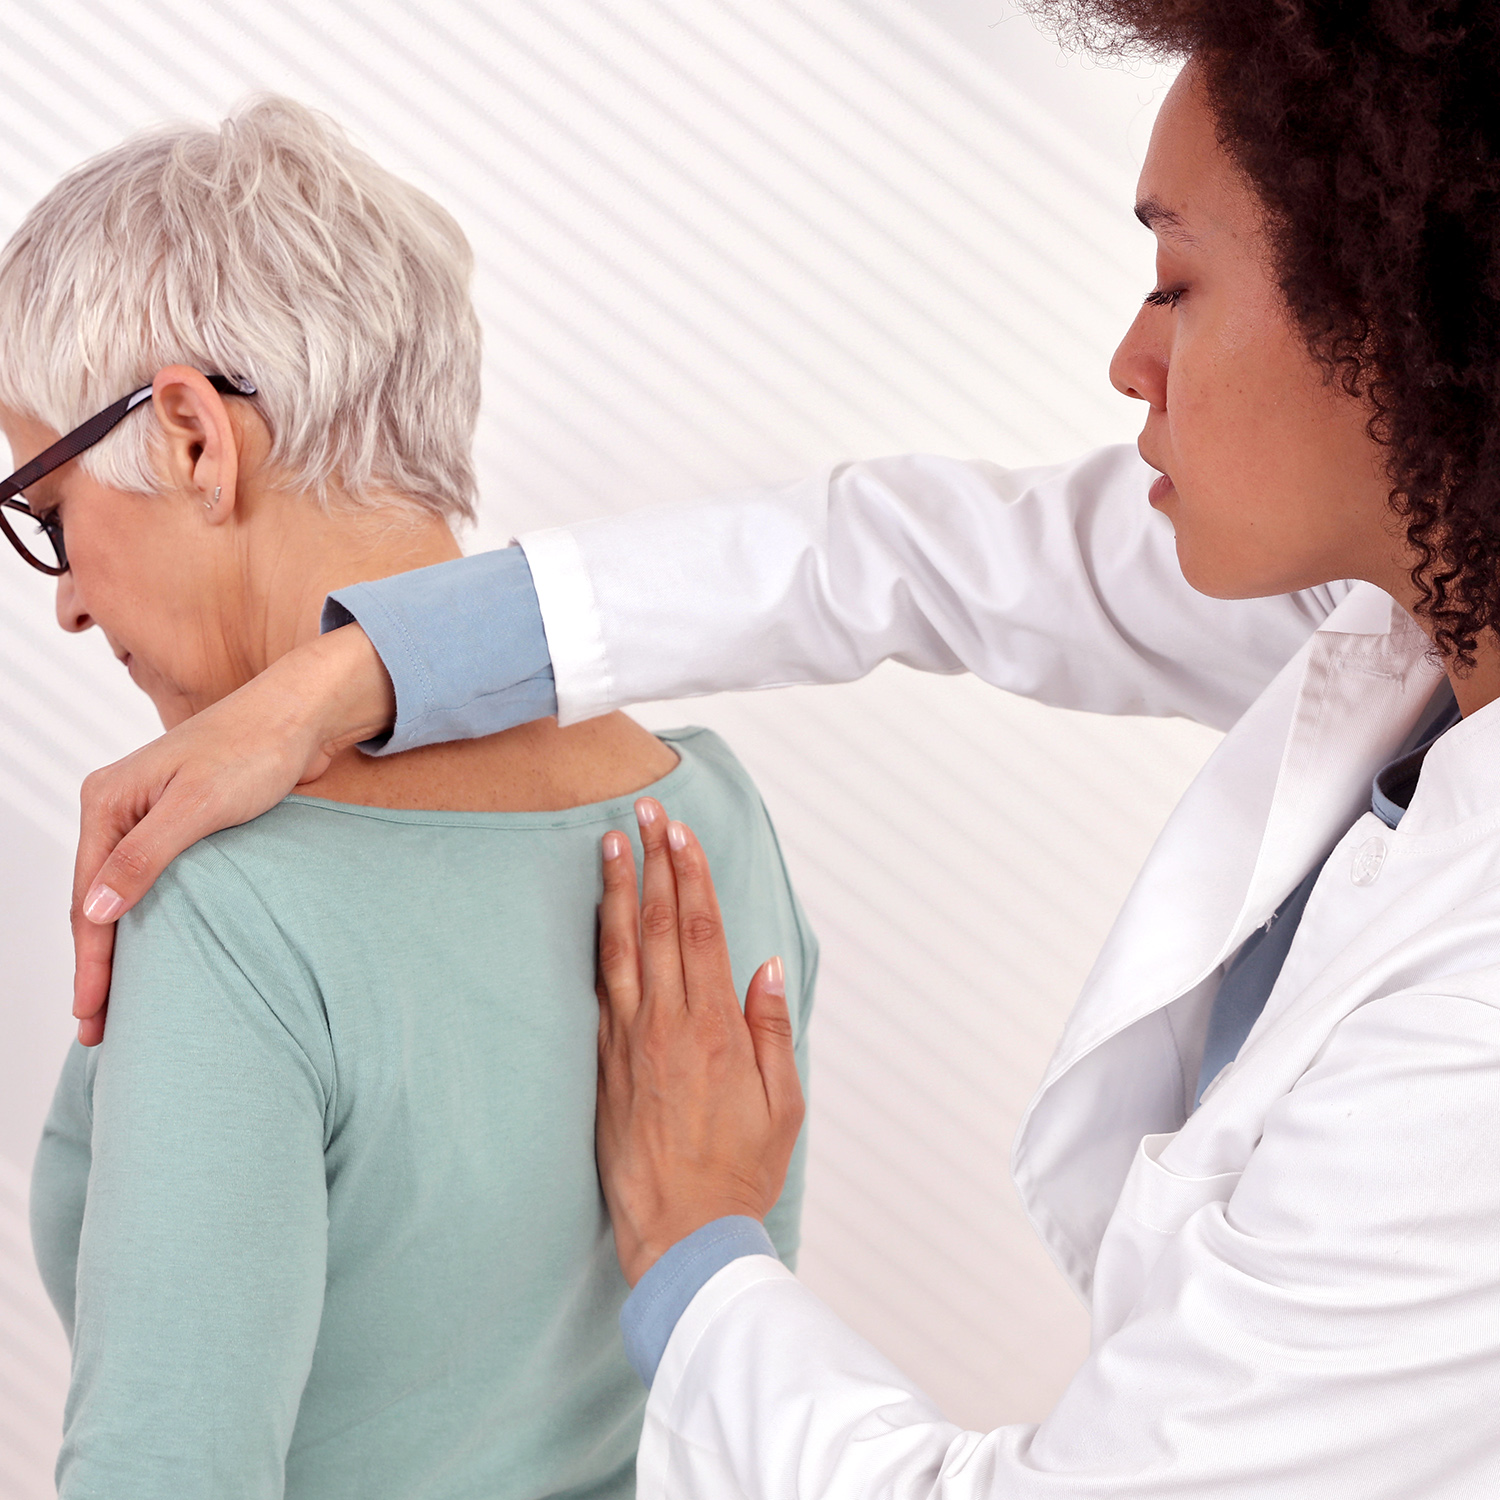 chiropractic spinal manipulation_gettyimages-1141753224_square.jpg